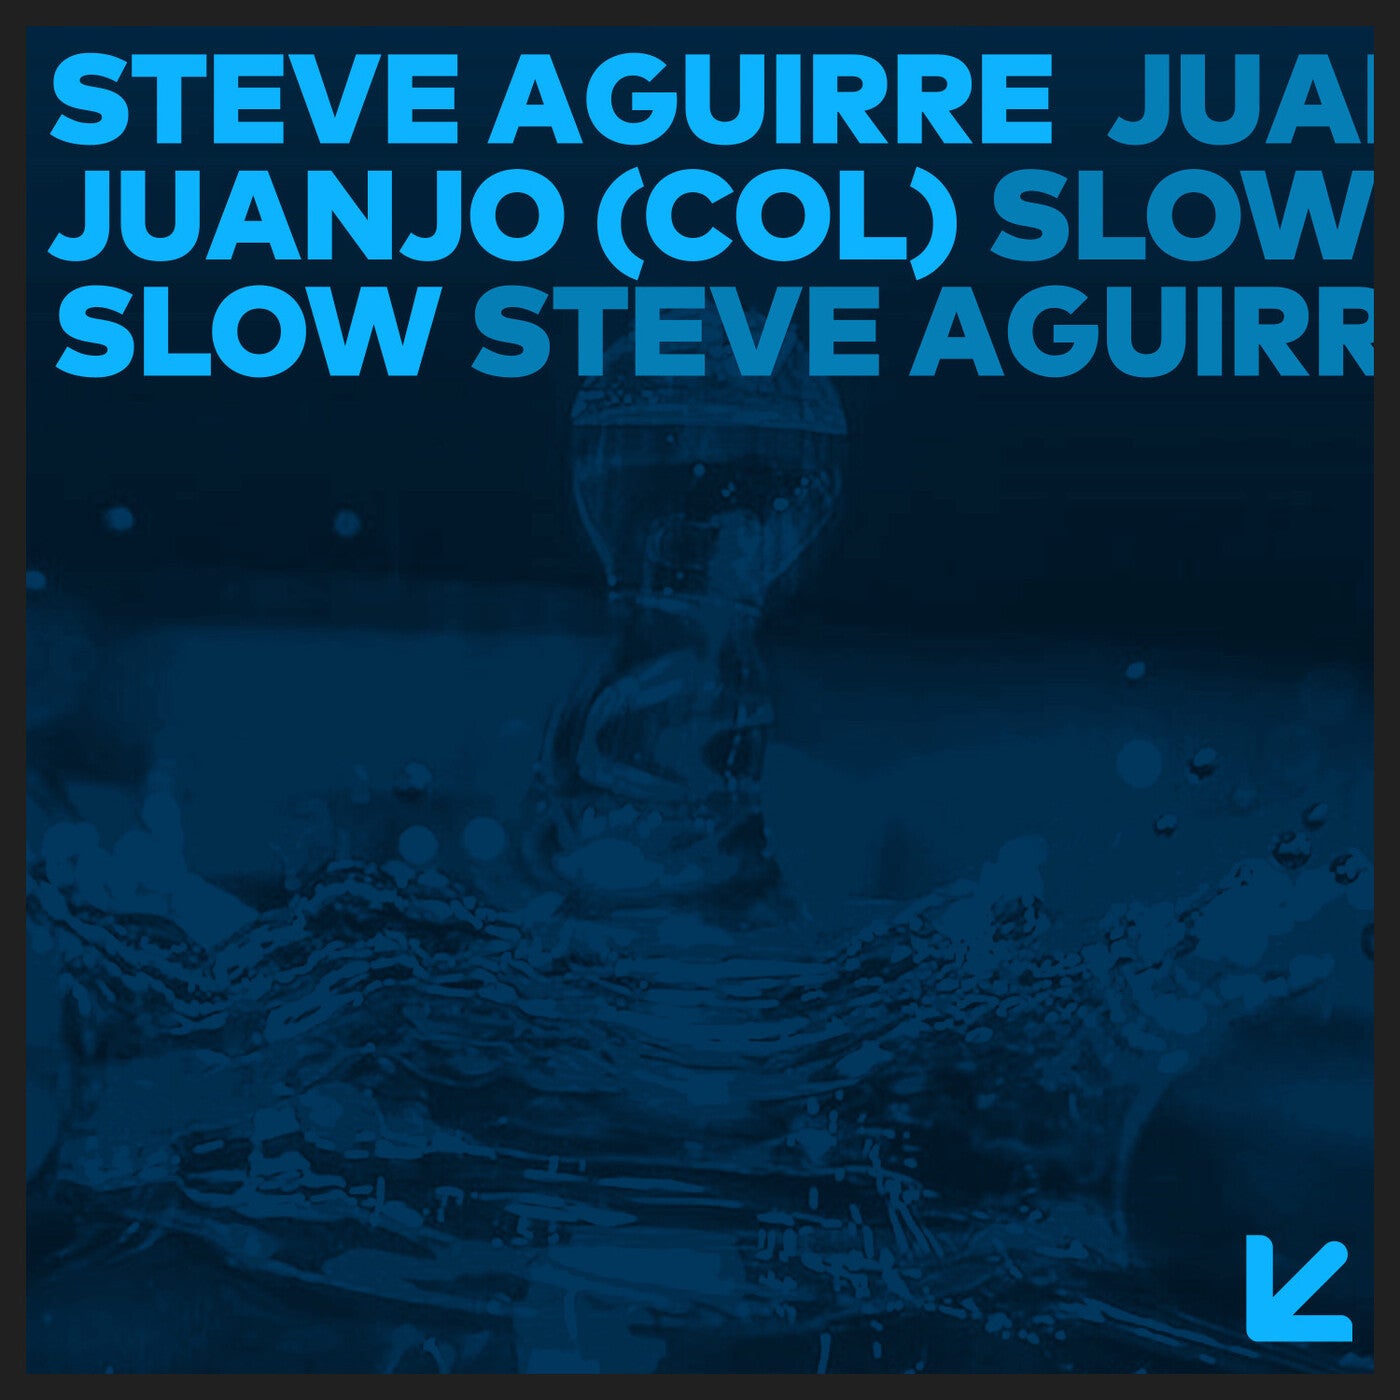 image cover: Steve Aguirre, Juanjo (COL) - Slow on BH Records